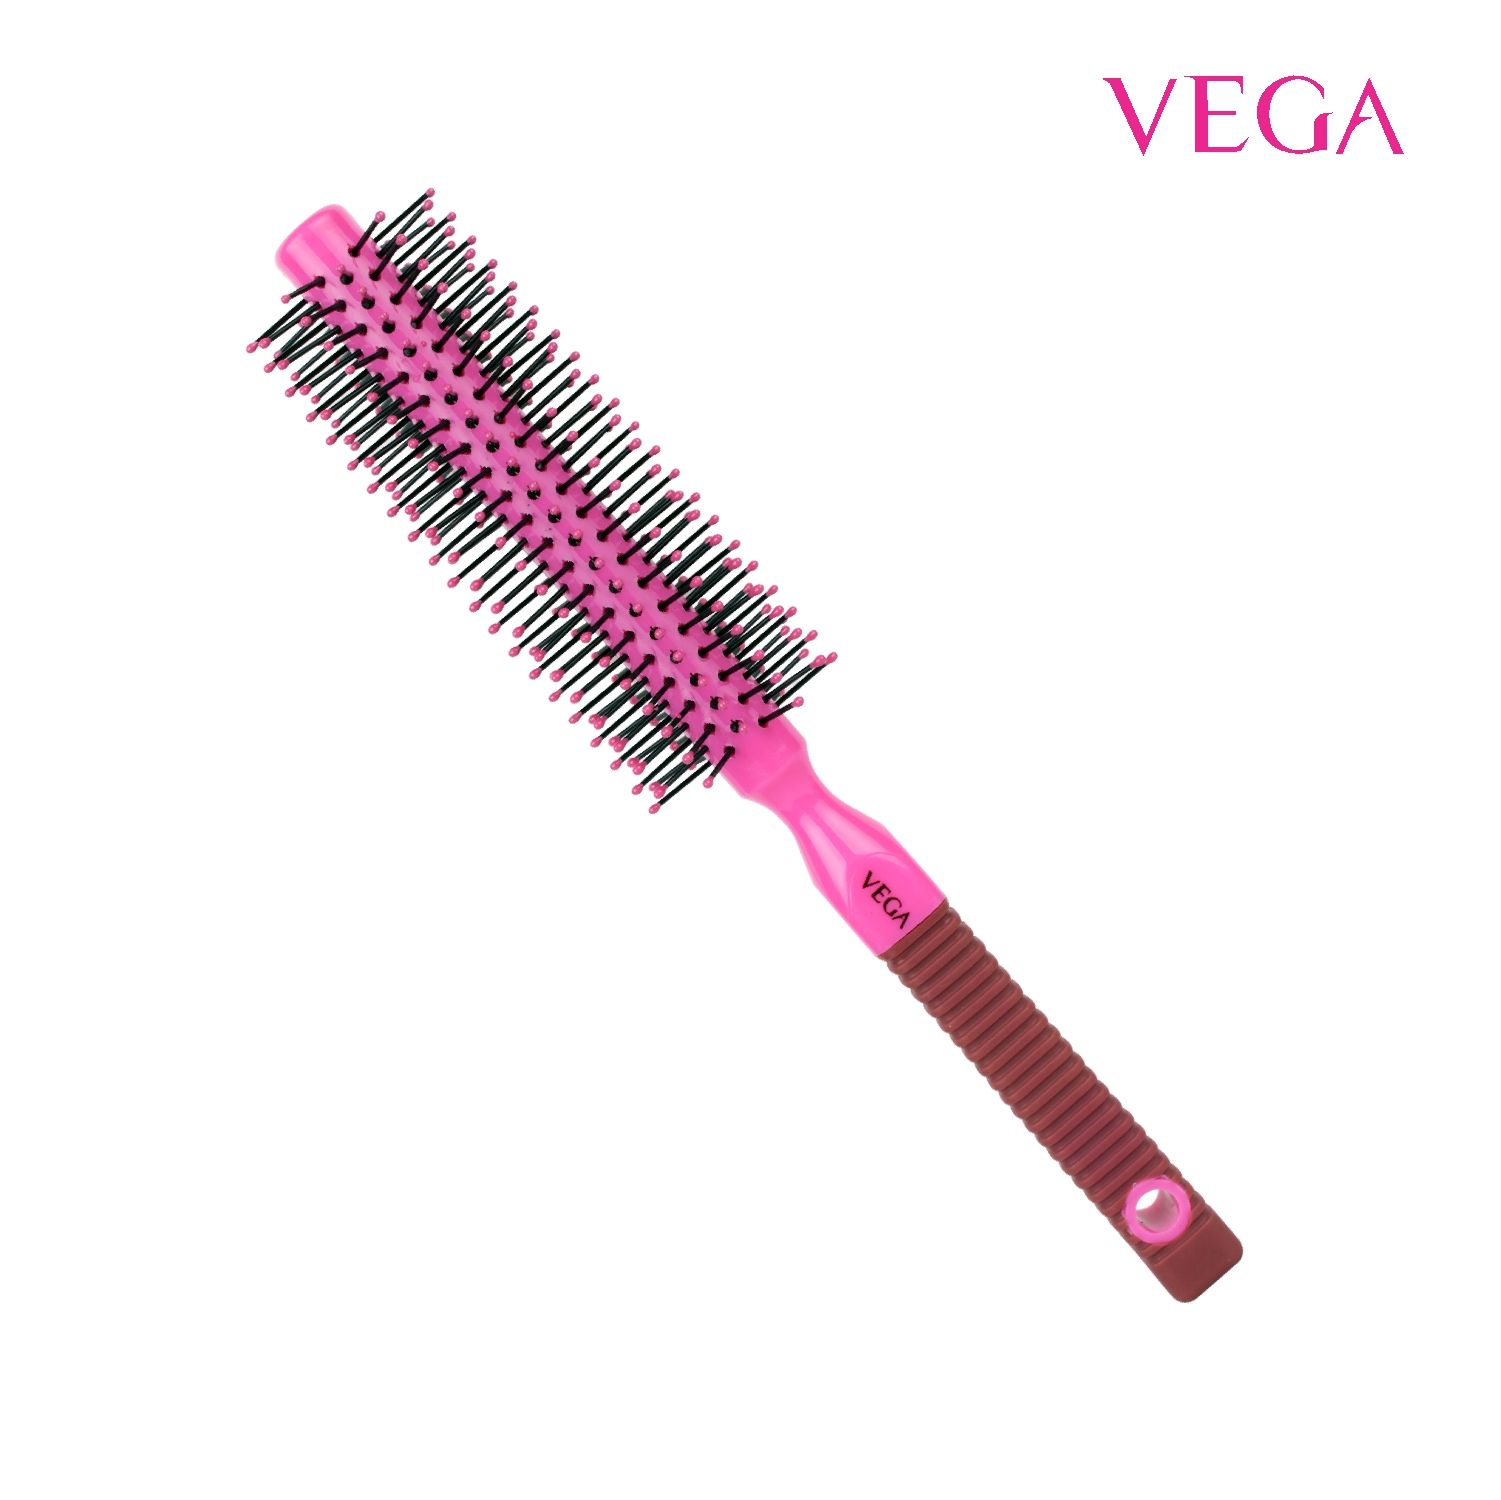 VEGA Basic Collection Hair Brush (R1-RB) (Color May Vary)